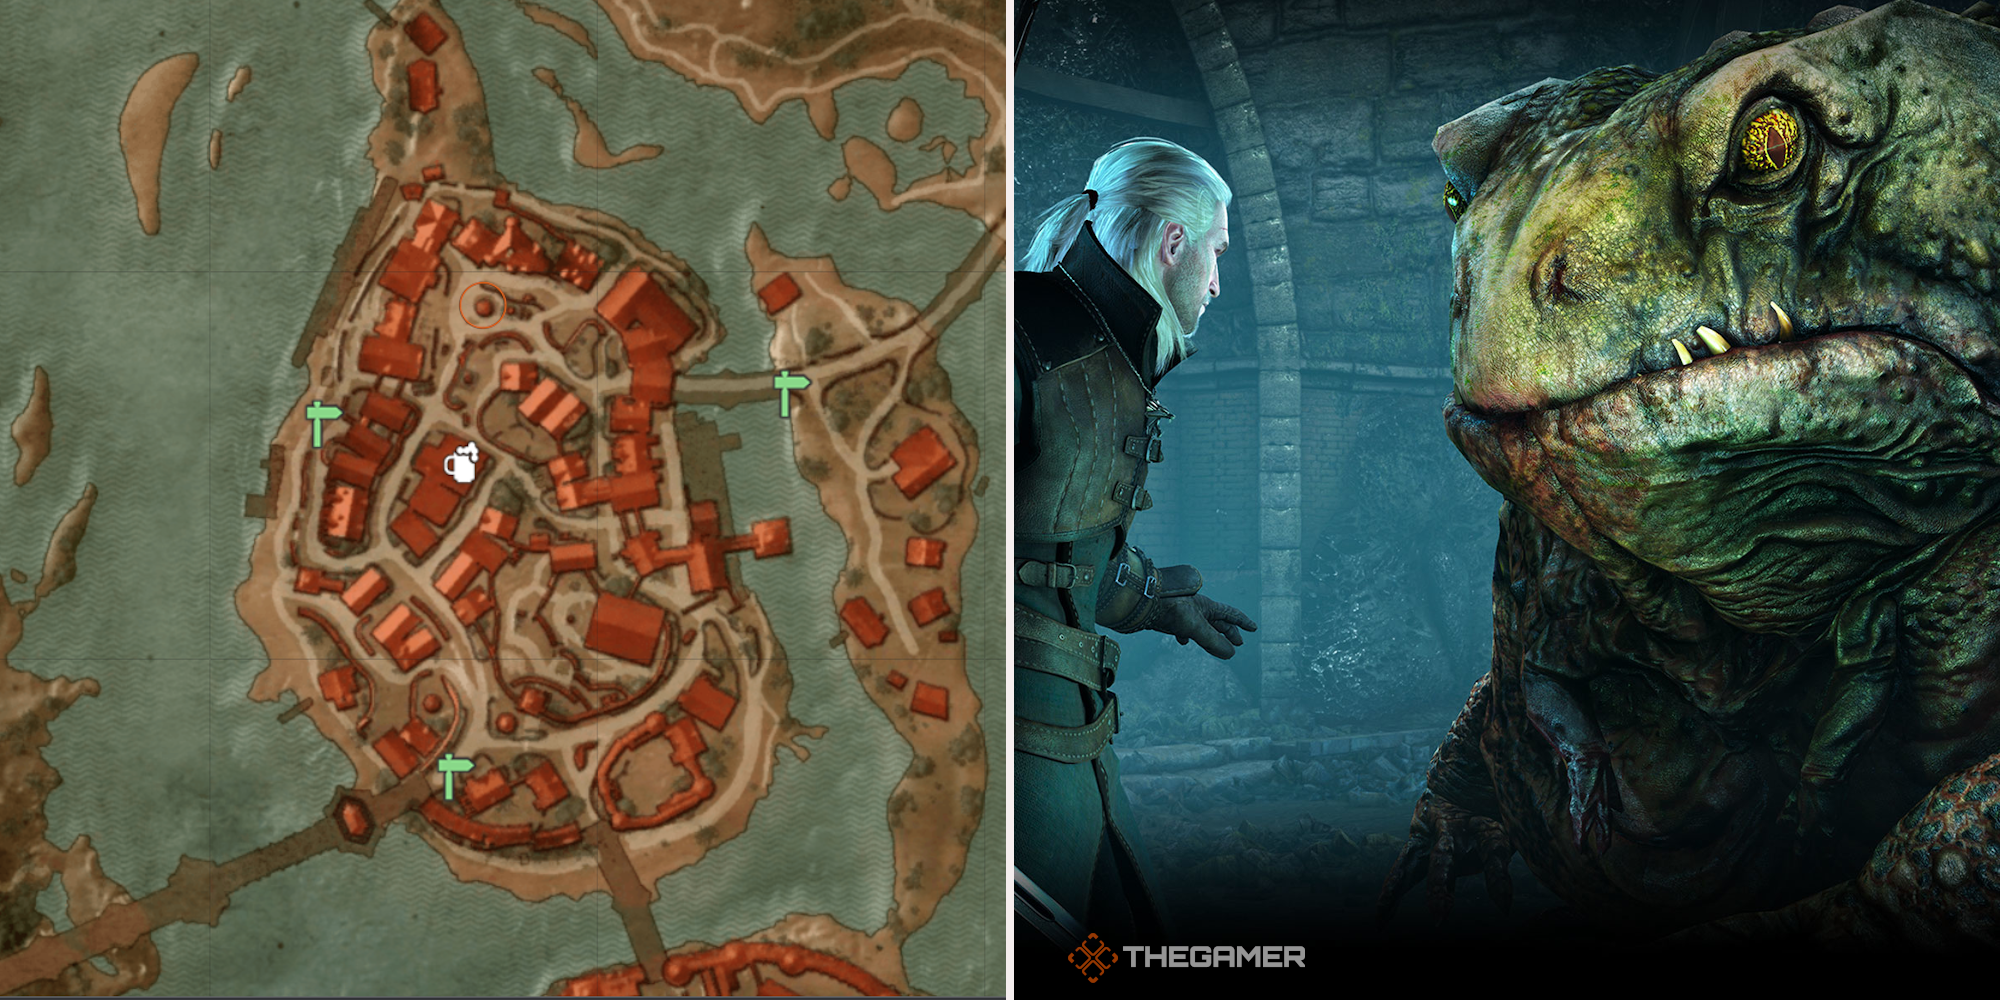 Evils Soft First Touches Oxenfurt sewers map guide The Witcher 3 pastemagazine